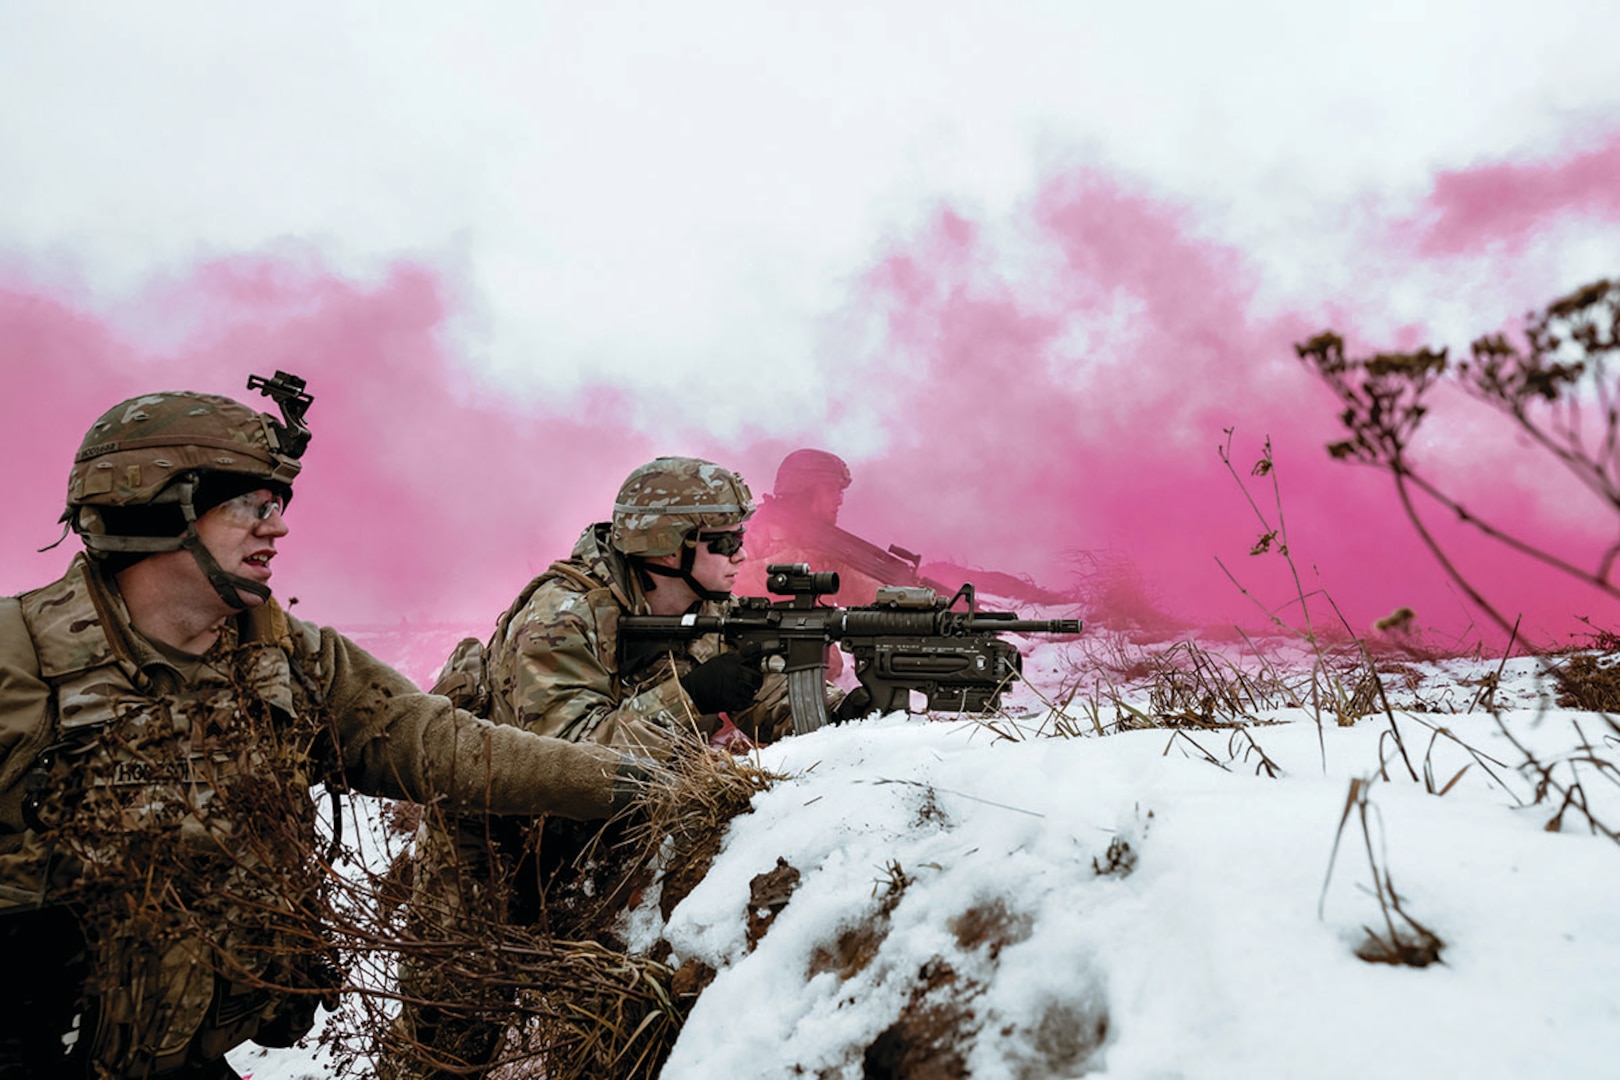 Battle Group Poland—multinational coalition of U.S., UK, Croatian, and Romanian soldiers who serve with Polish armed forces 15th Mechanized Brigade—performs winter live-fire training during Operation Raider Lighting, at Bemowo Piskie training area, Poland, January 16, 2019 (U.S. Army/Arturo Guzman)